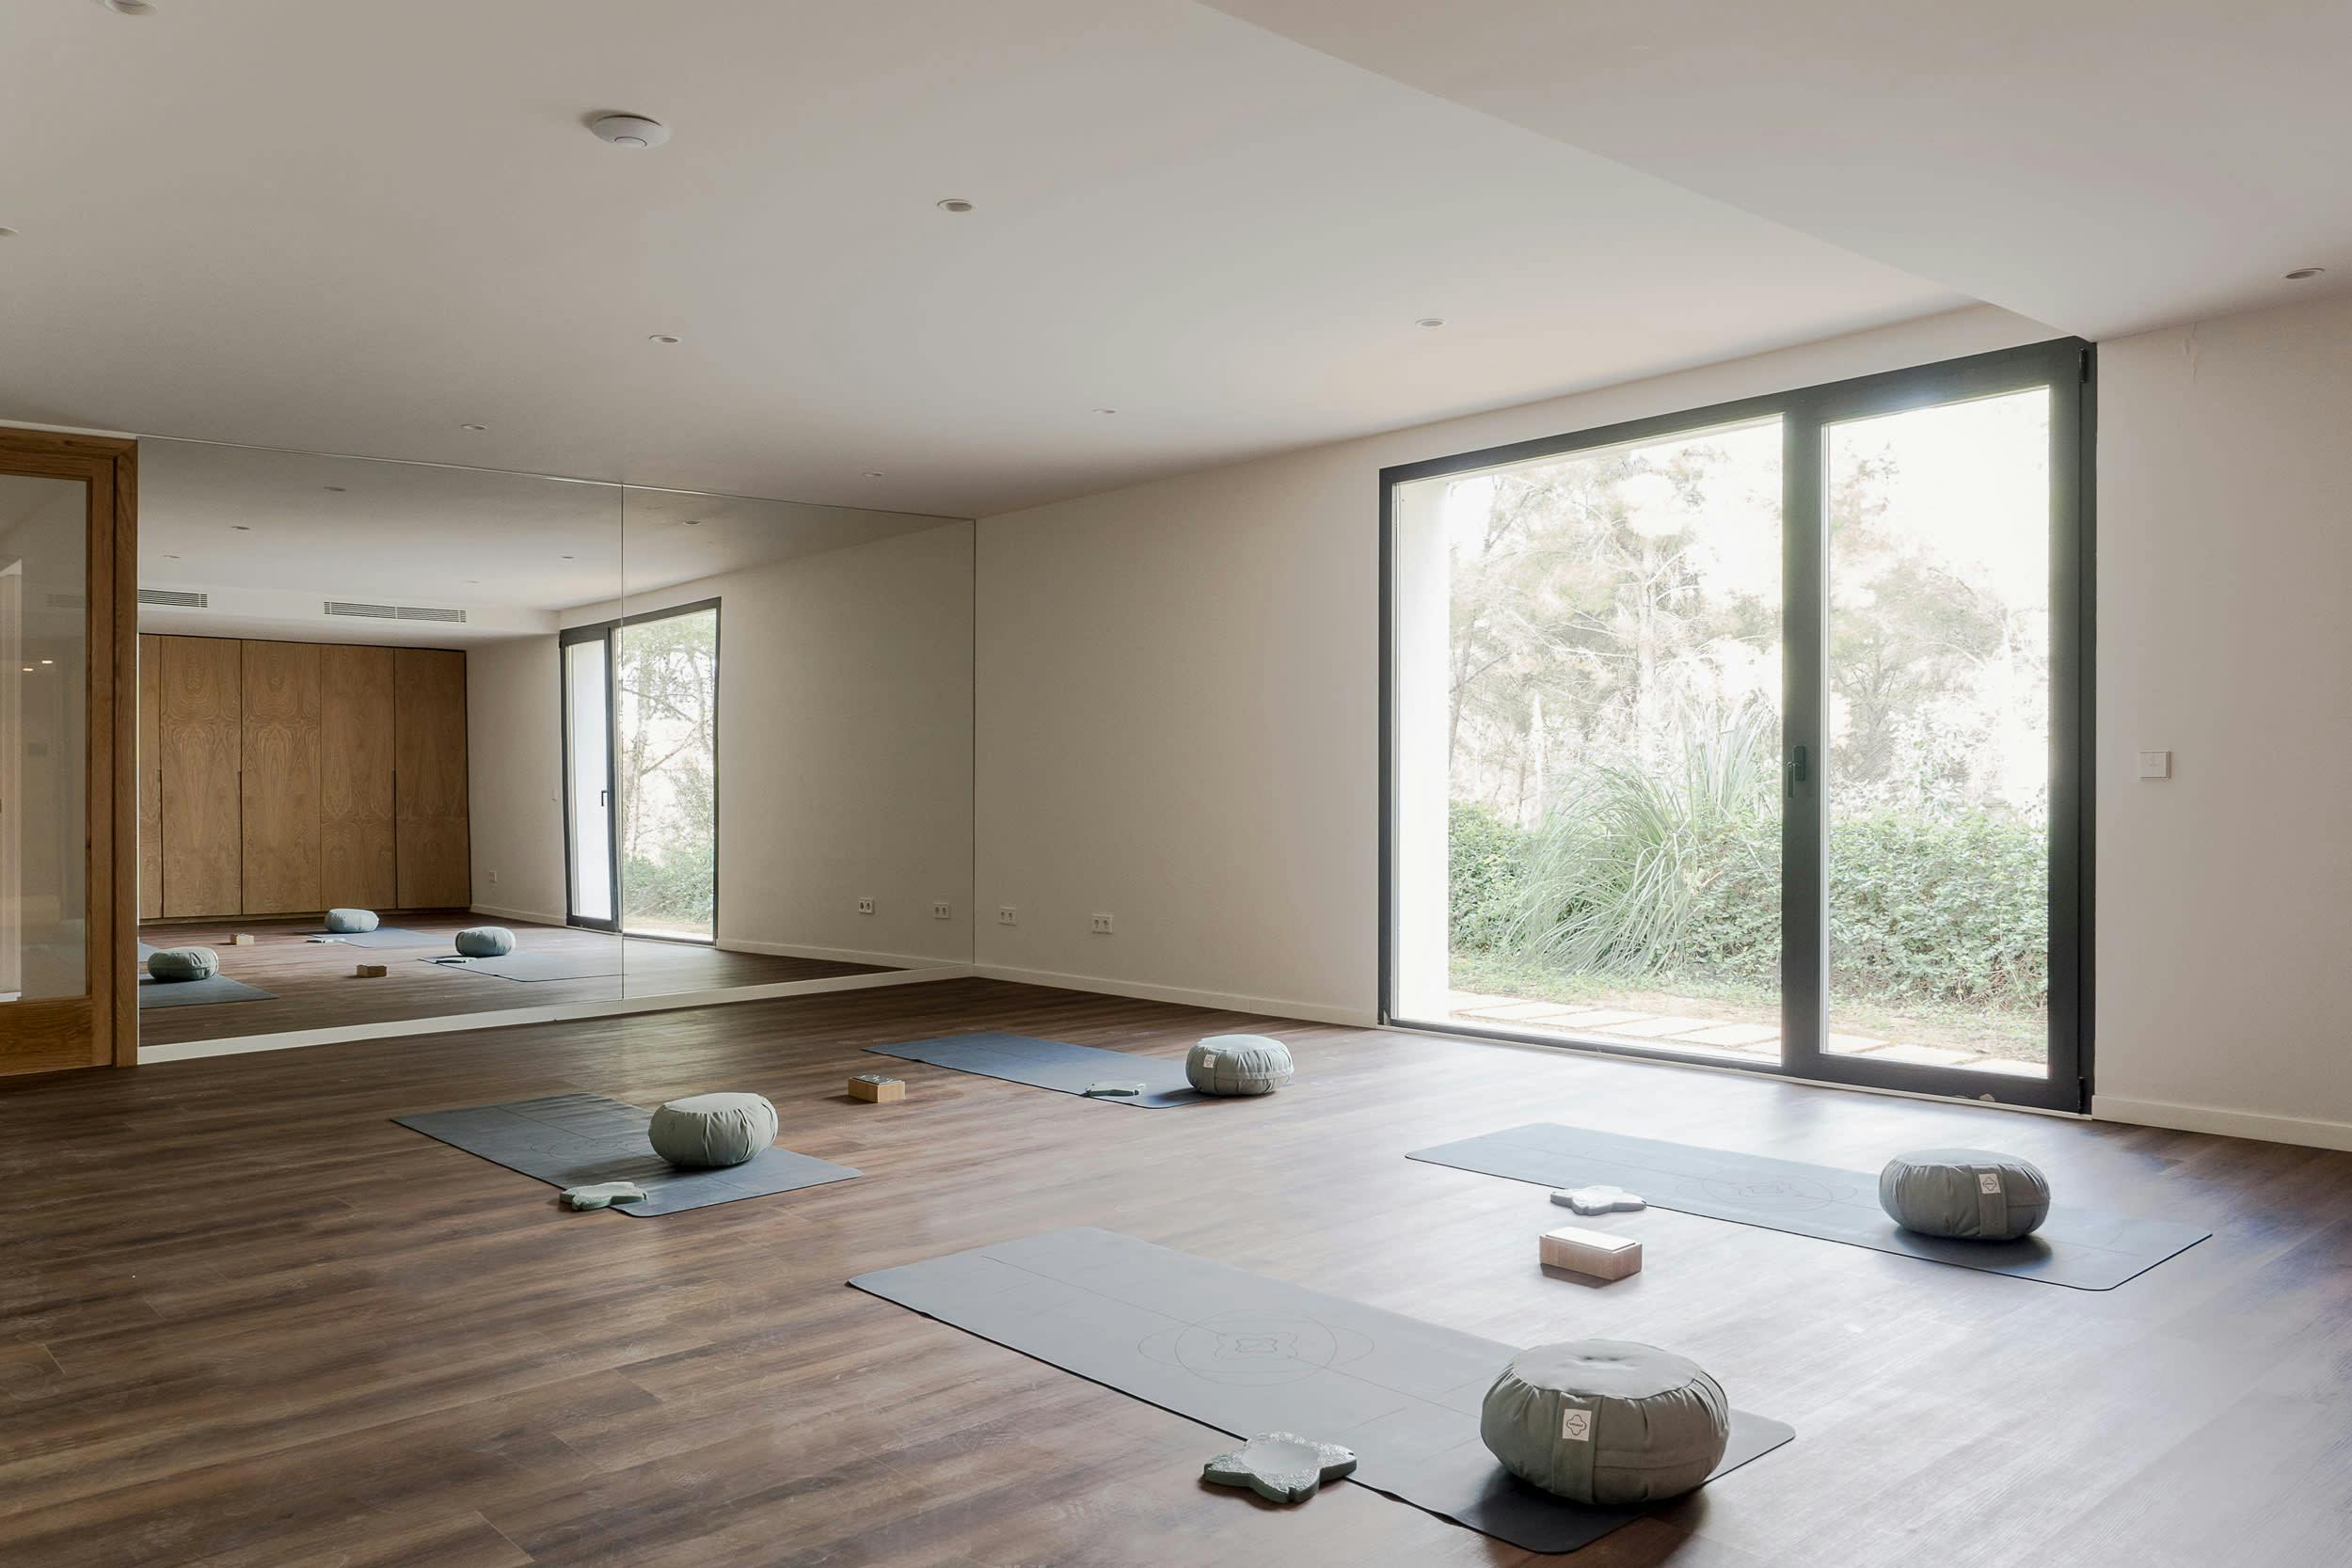 A large room with a wooden floor and a large window is filled with a variety of yoga mats and balls, creating a spacious and inviting atmosphere for practicing yoga.